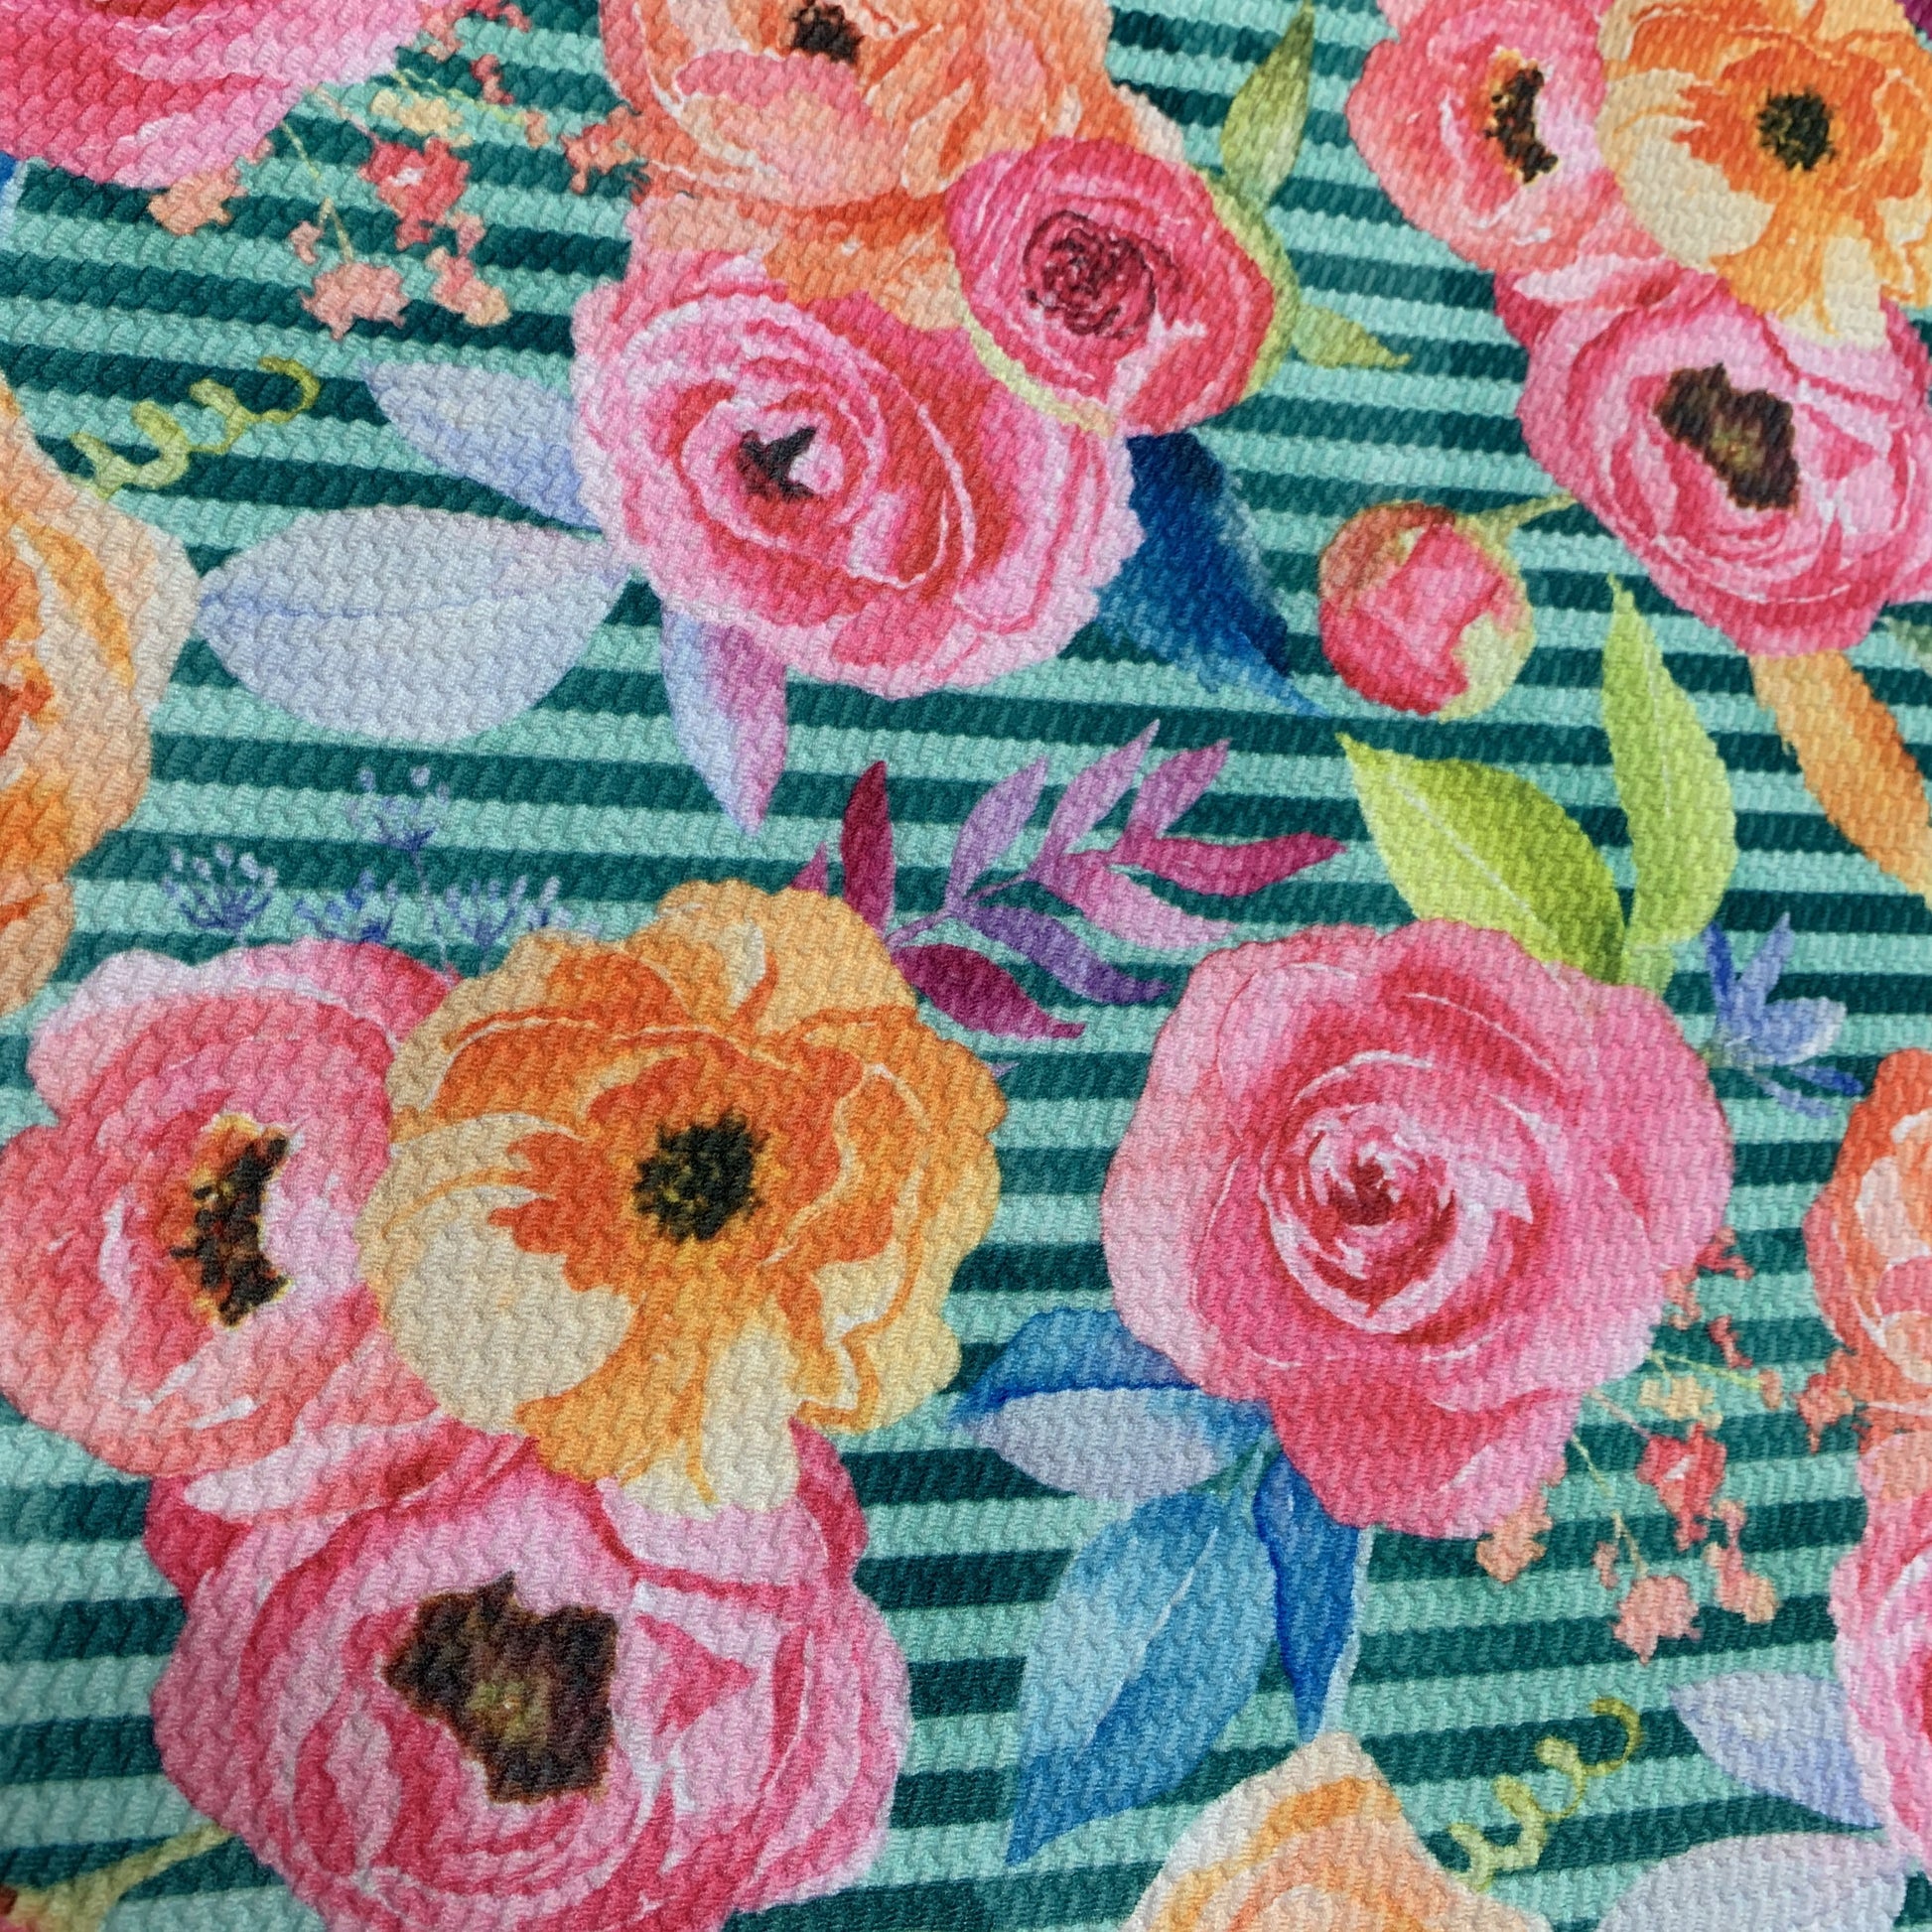 Pink and Orange Flowers on Greeen Stripes Bullet Knit - Nature's Fabrics